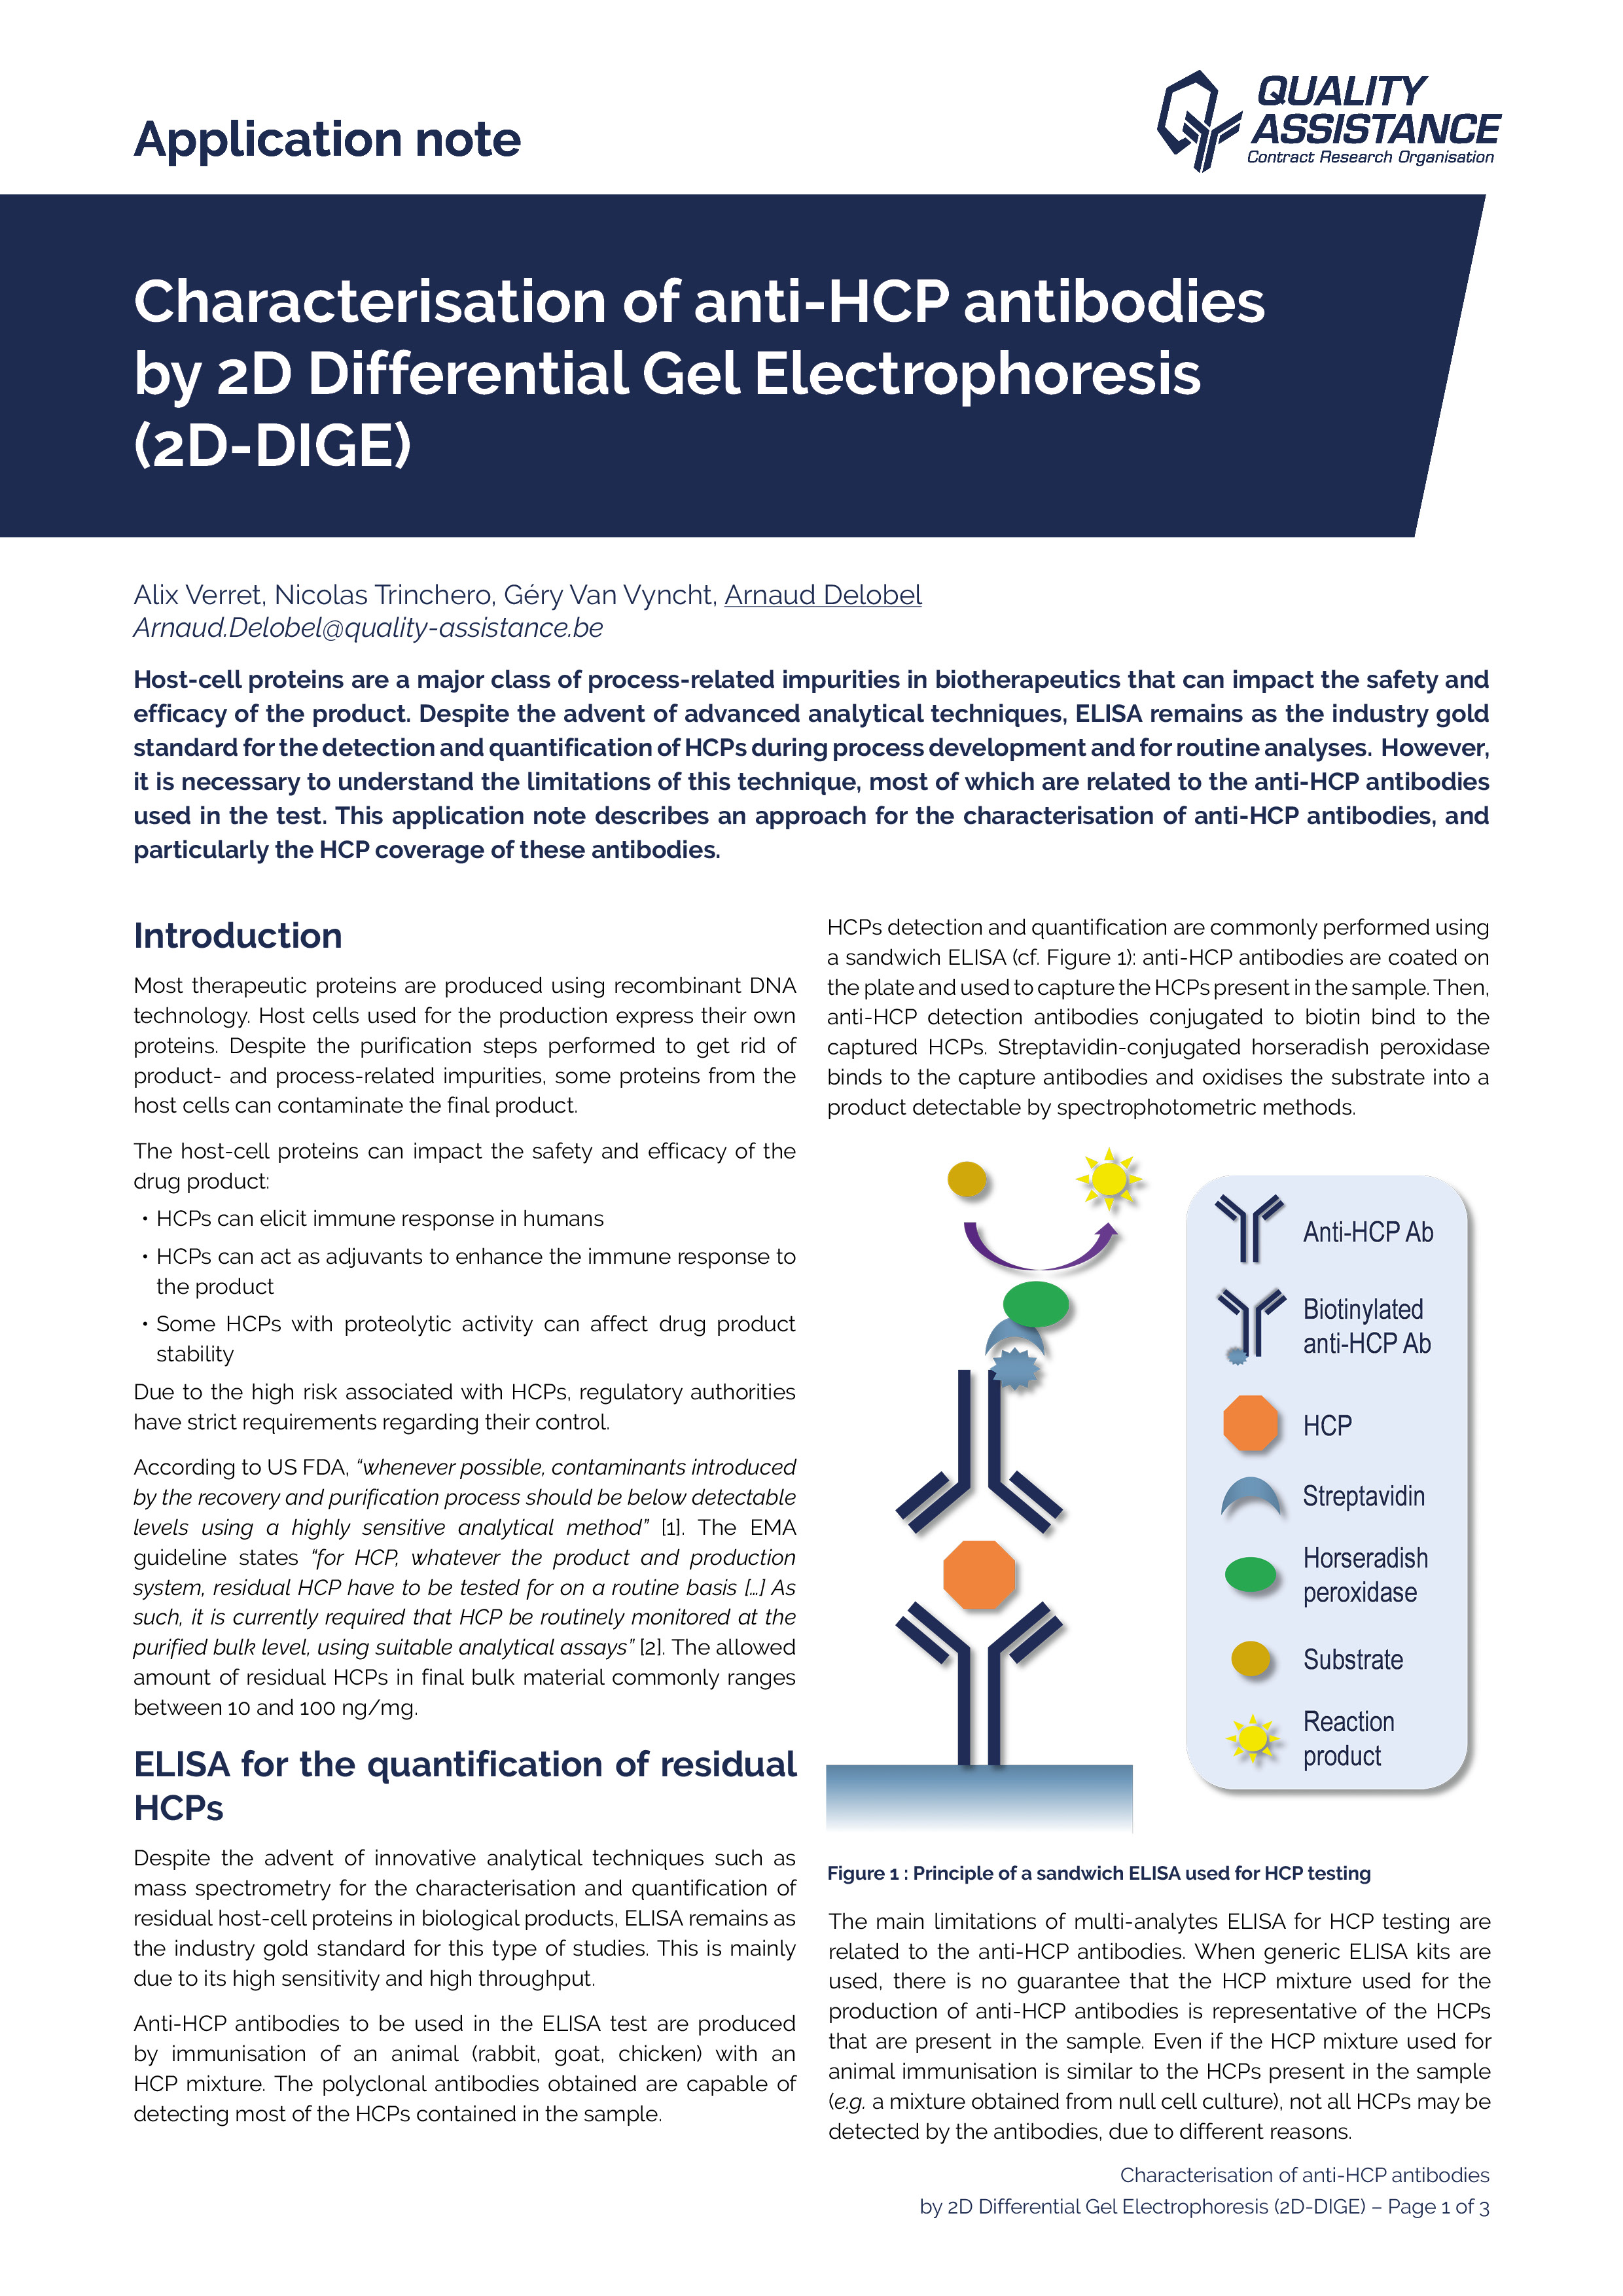 Characterisation of Anti-HCP antibodies by 2D differential Gel Electrophoreses